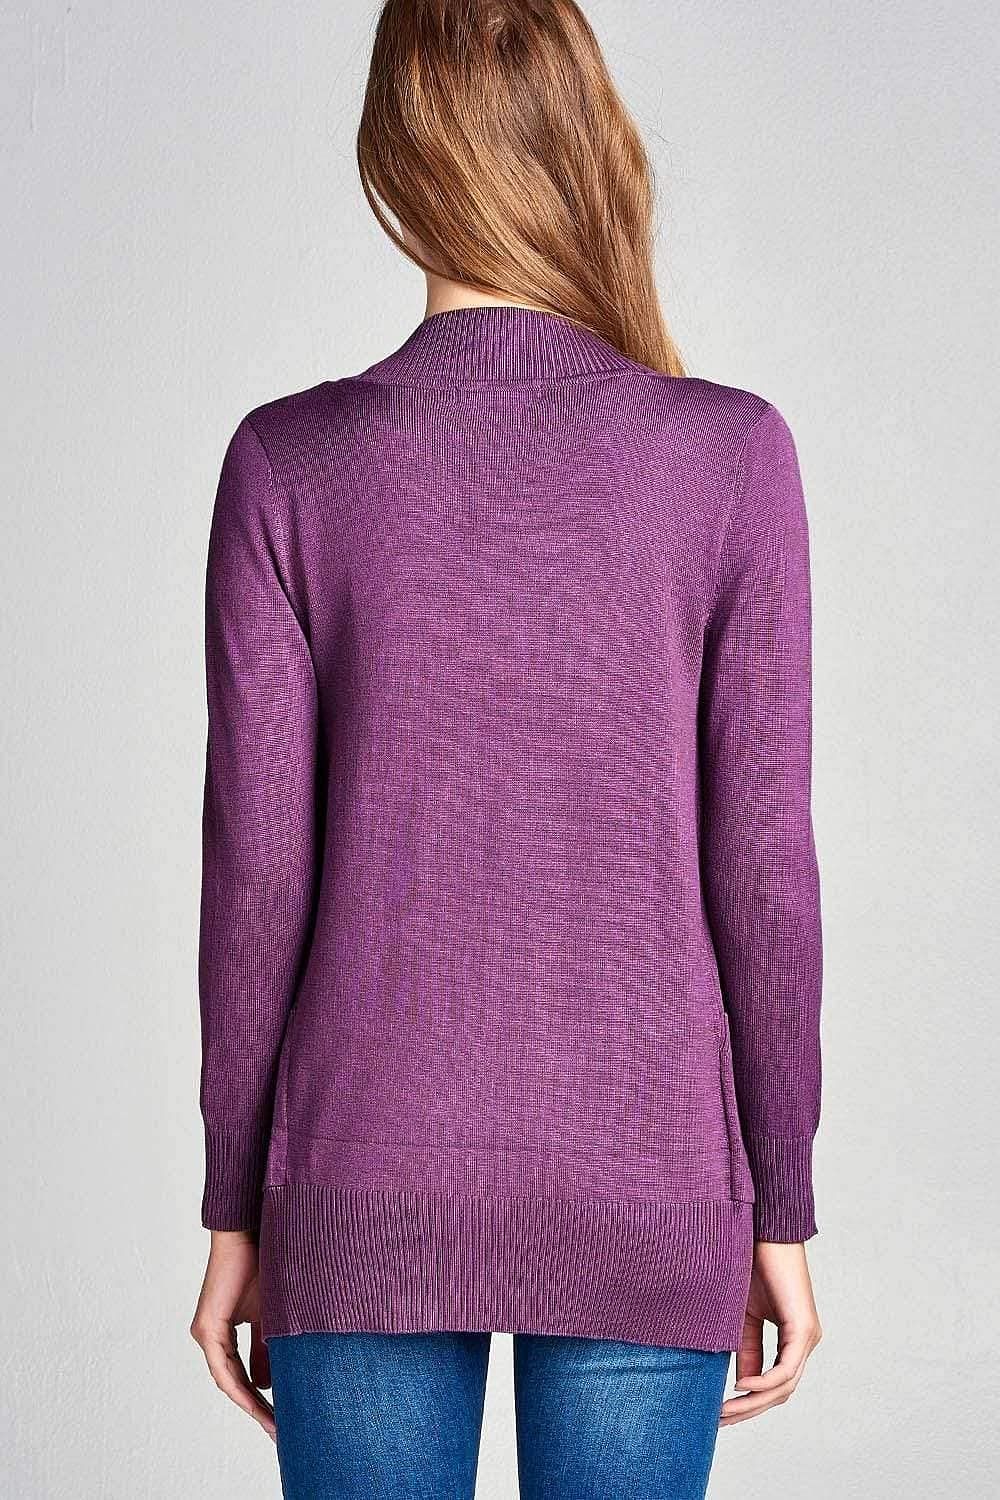 Purple Long Sleeve Open Front Rib Knit Cardigan - Shopping Therapy Cardigan